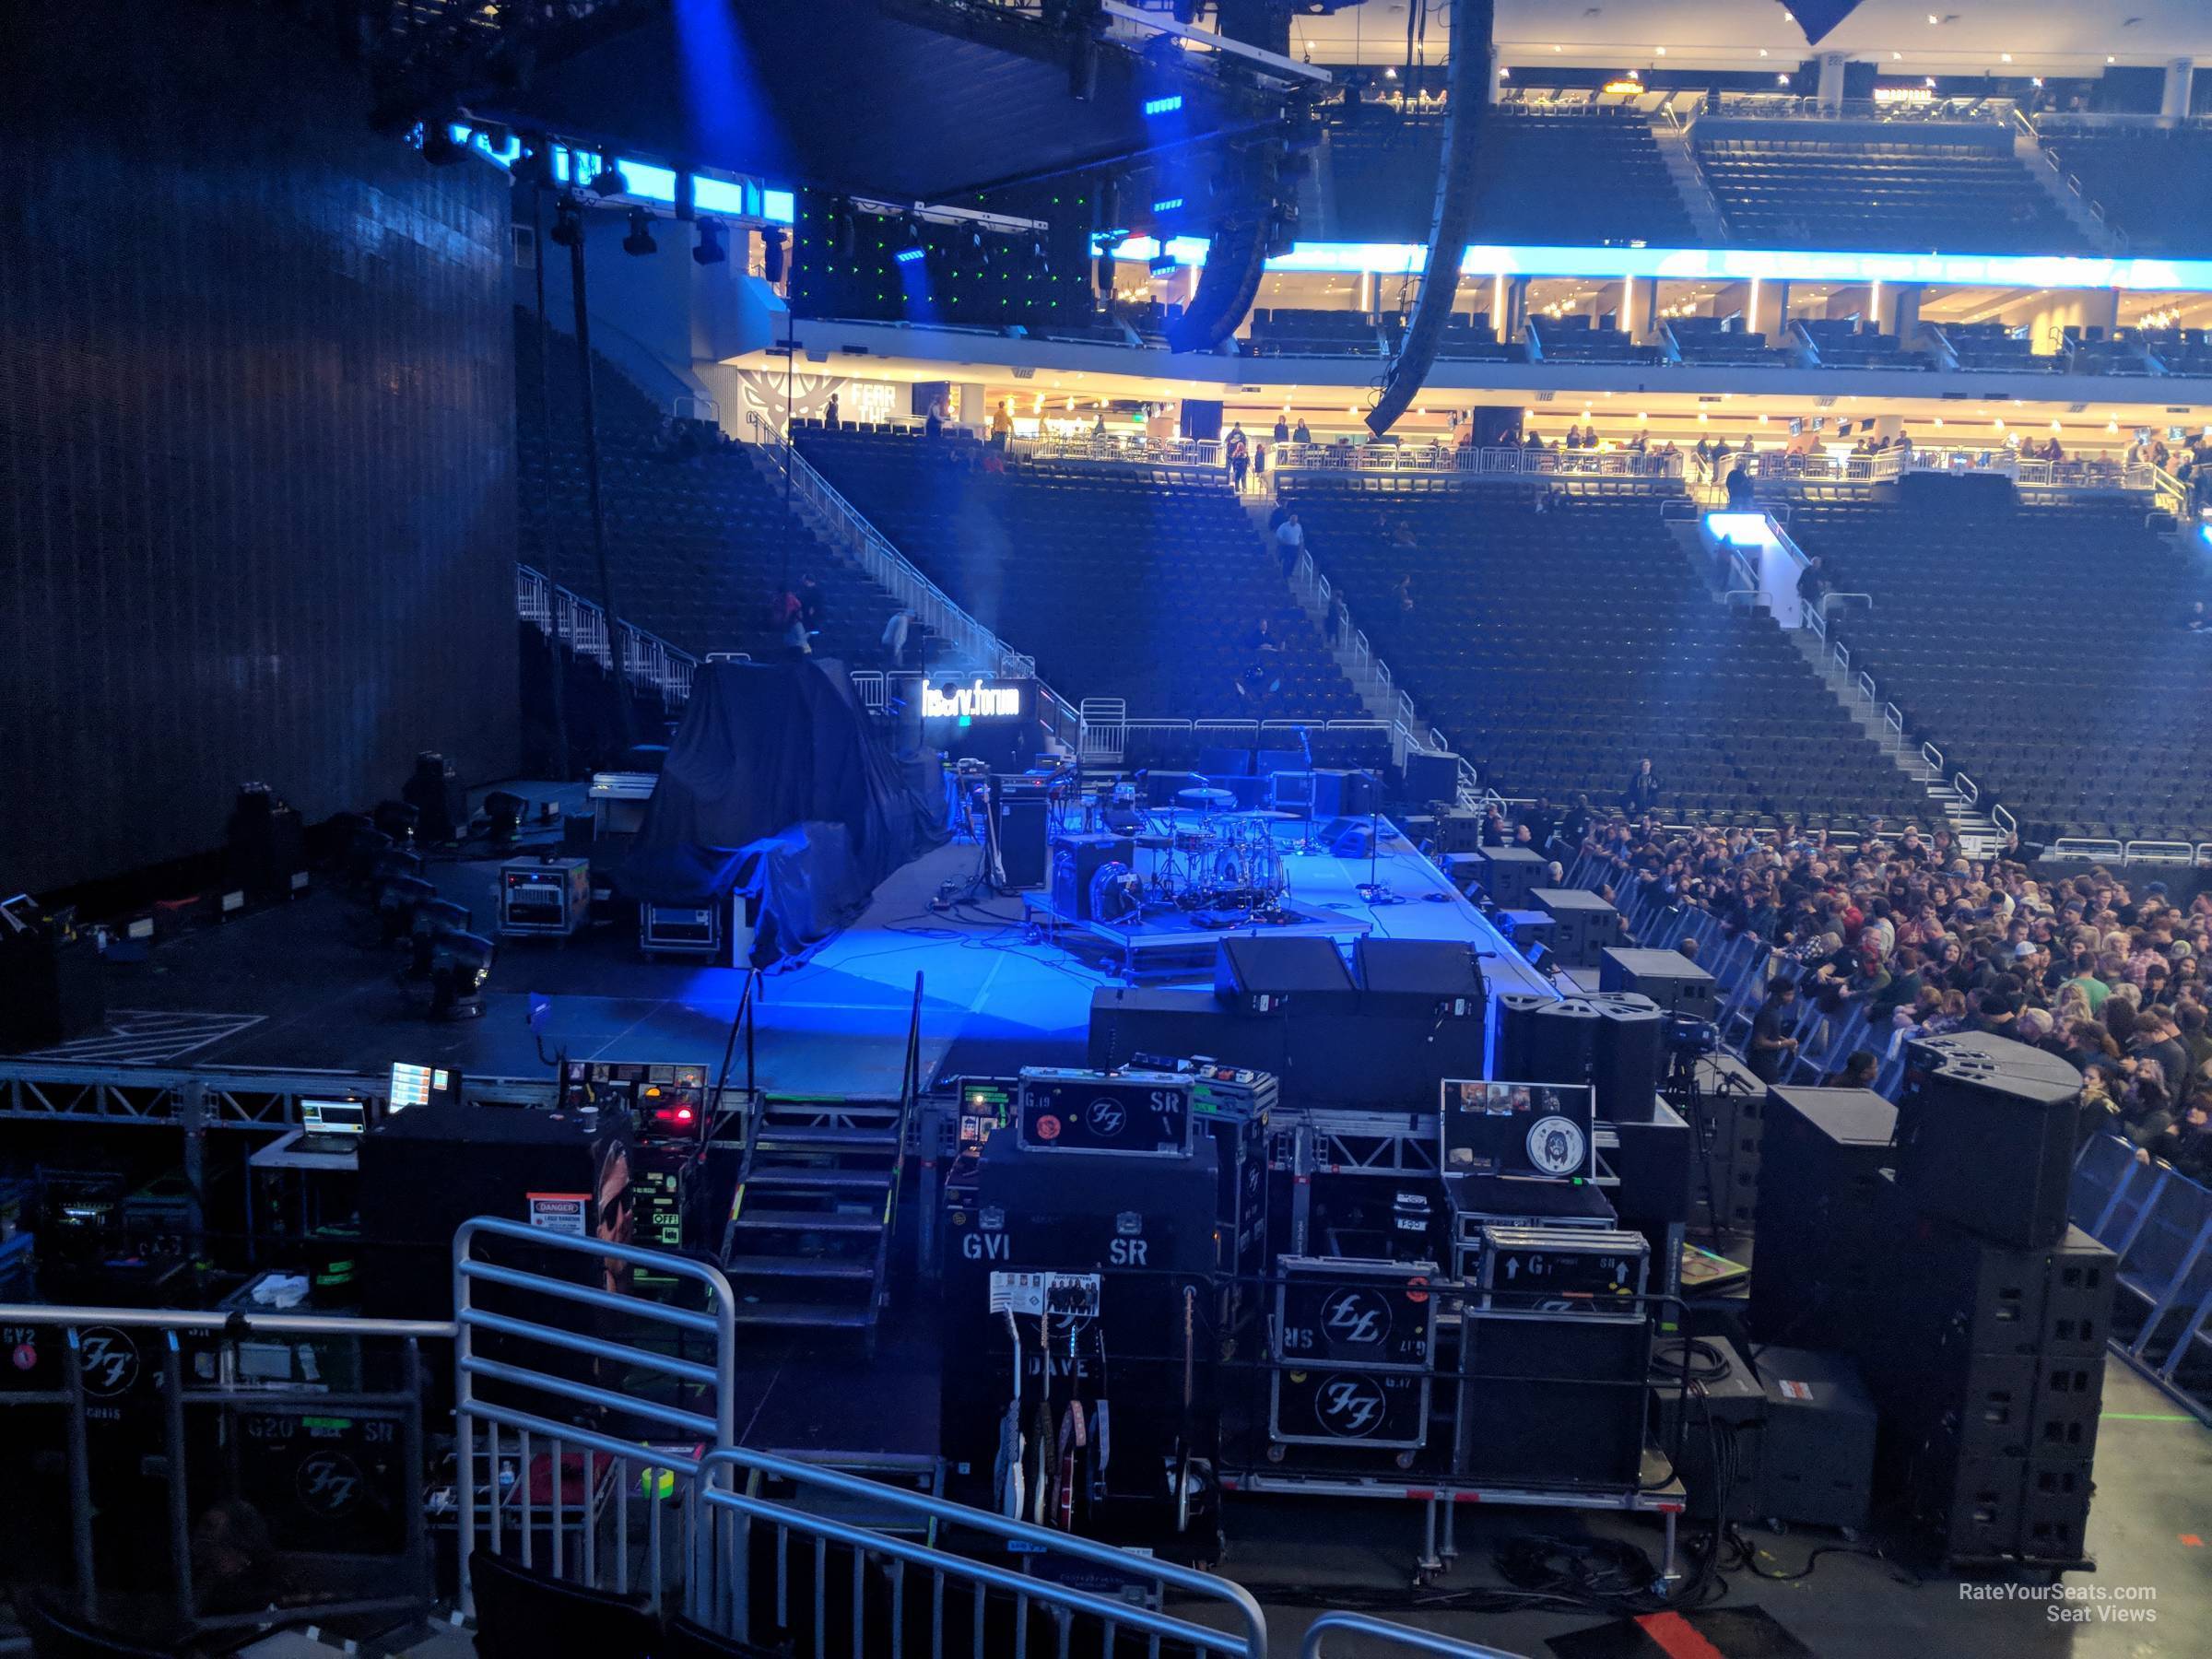 section 108, row 11 seat view  for concert - fiserv forum